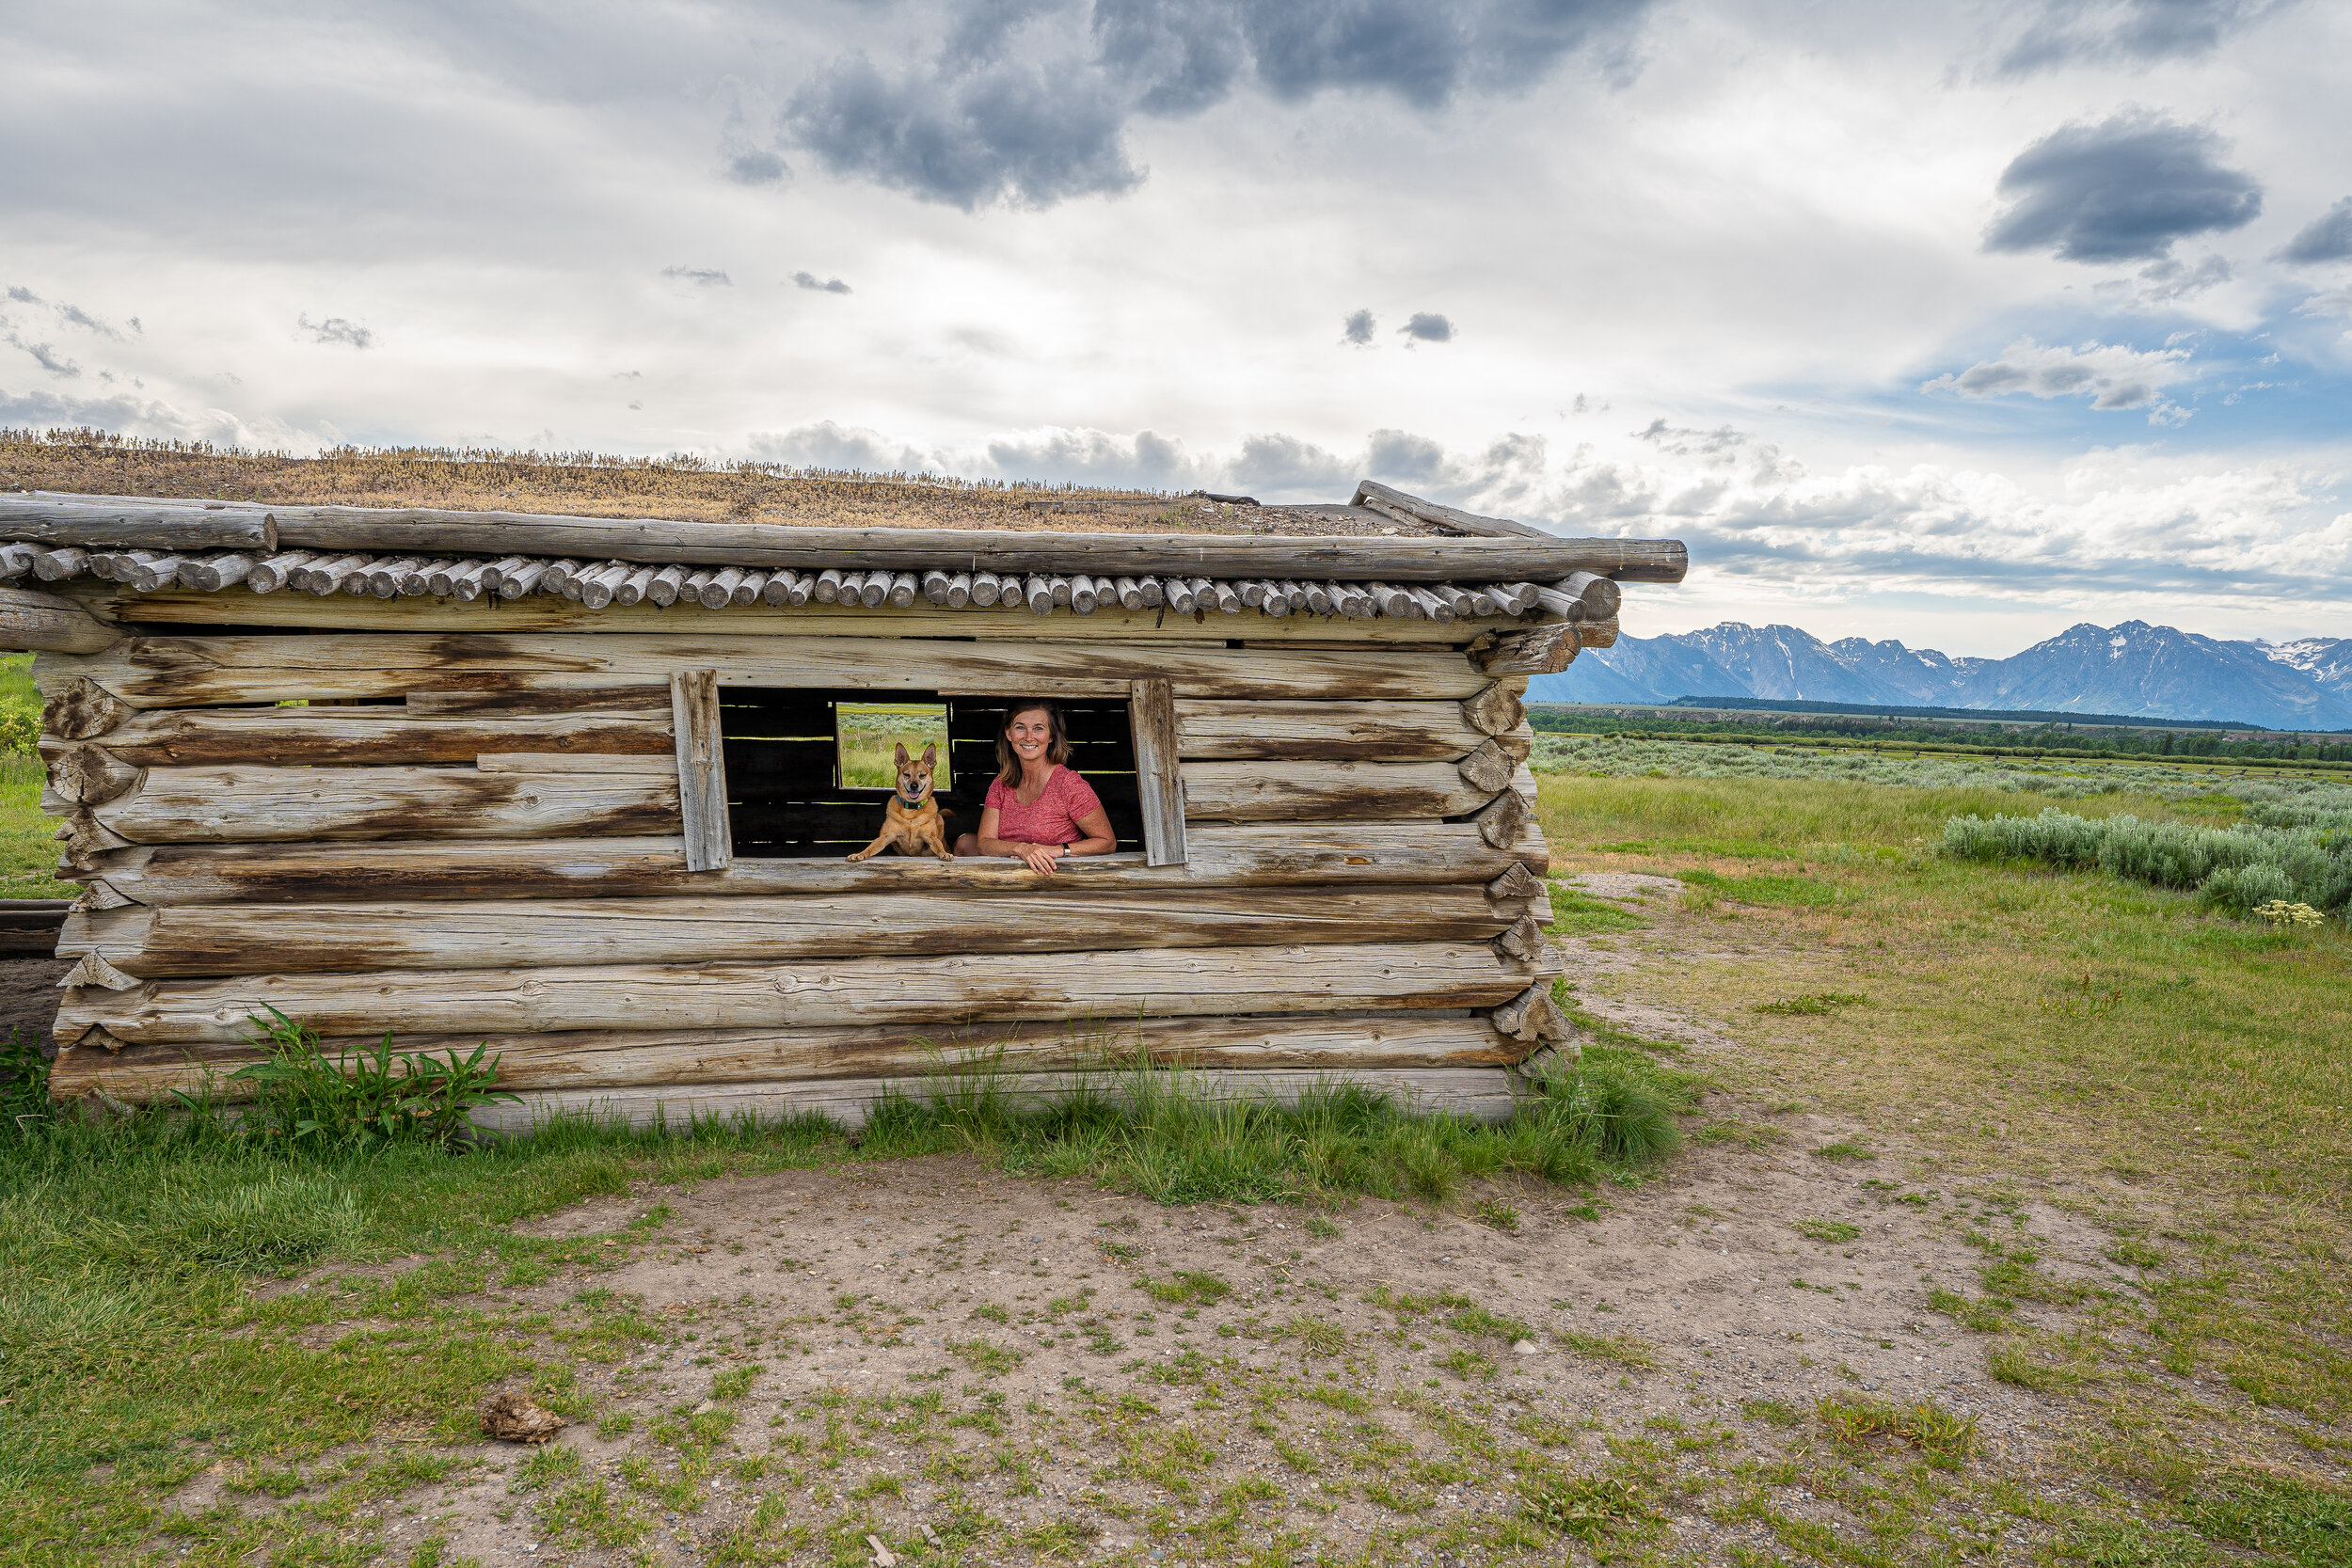  At Grand Teton NP we explored many old barns and buildings along Mormon Row Historic District. Mormon settlers arrived here from Idaho in the late 1800s and established 27 homesteads. Six homesteads remain along with drainage systems dug by hand for